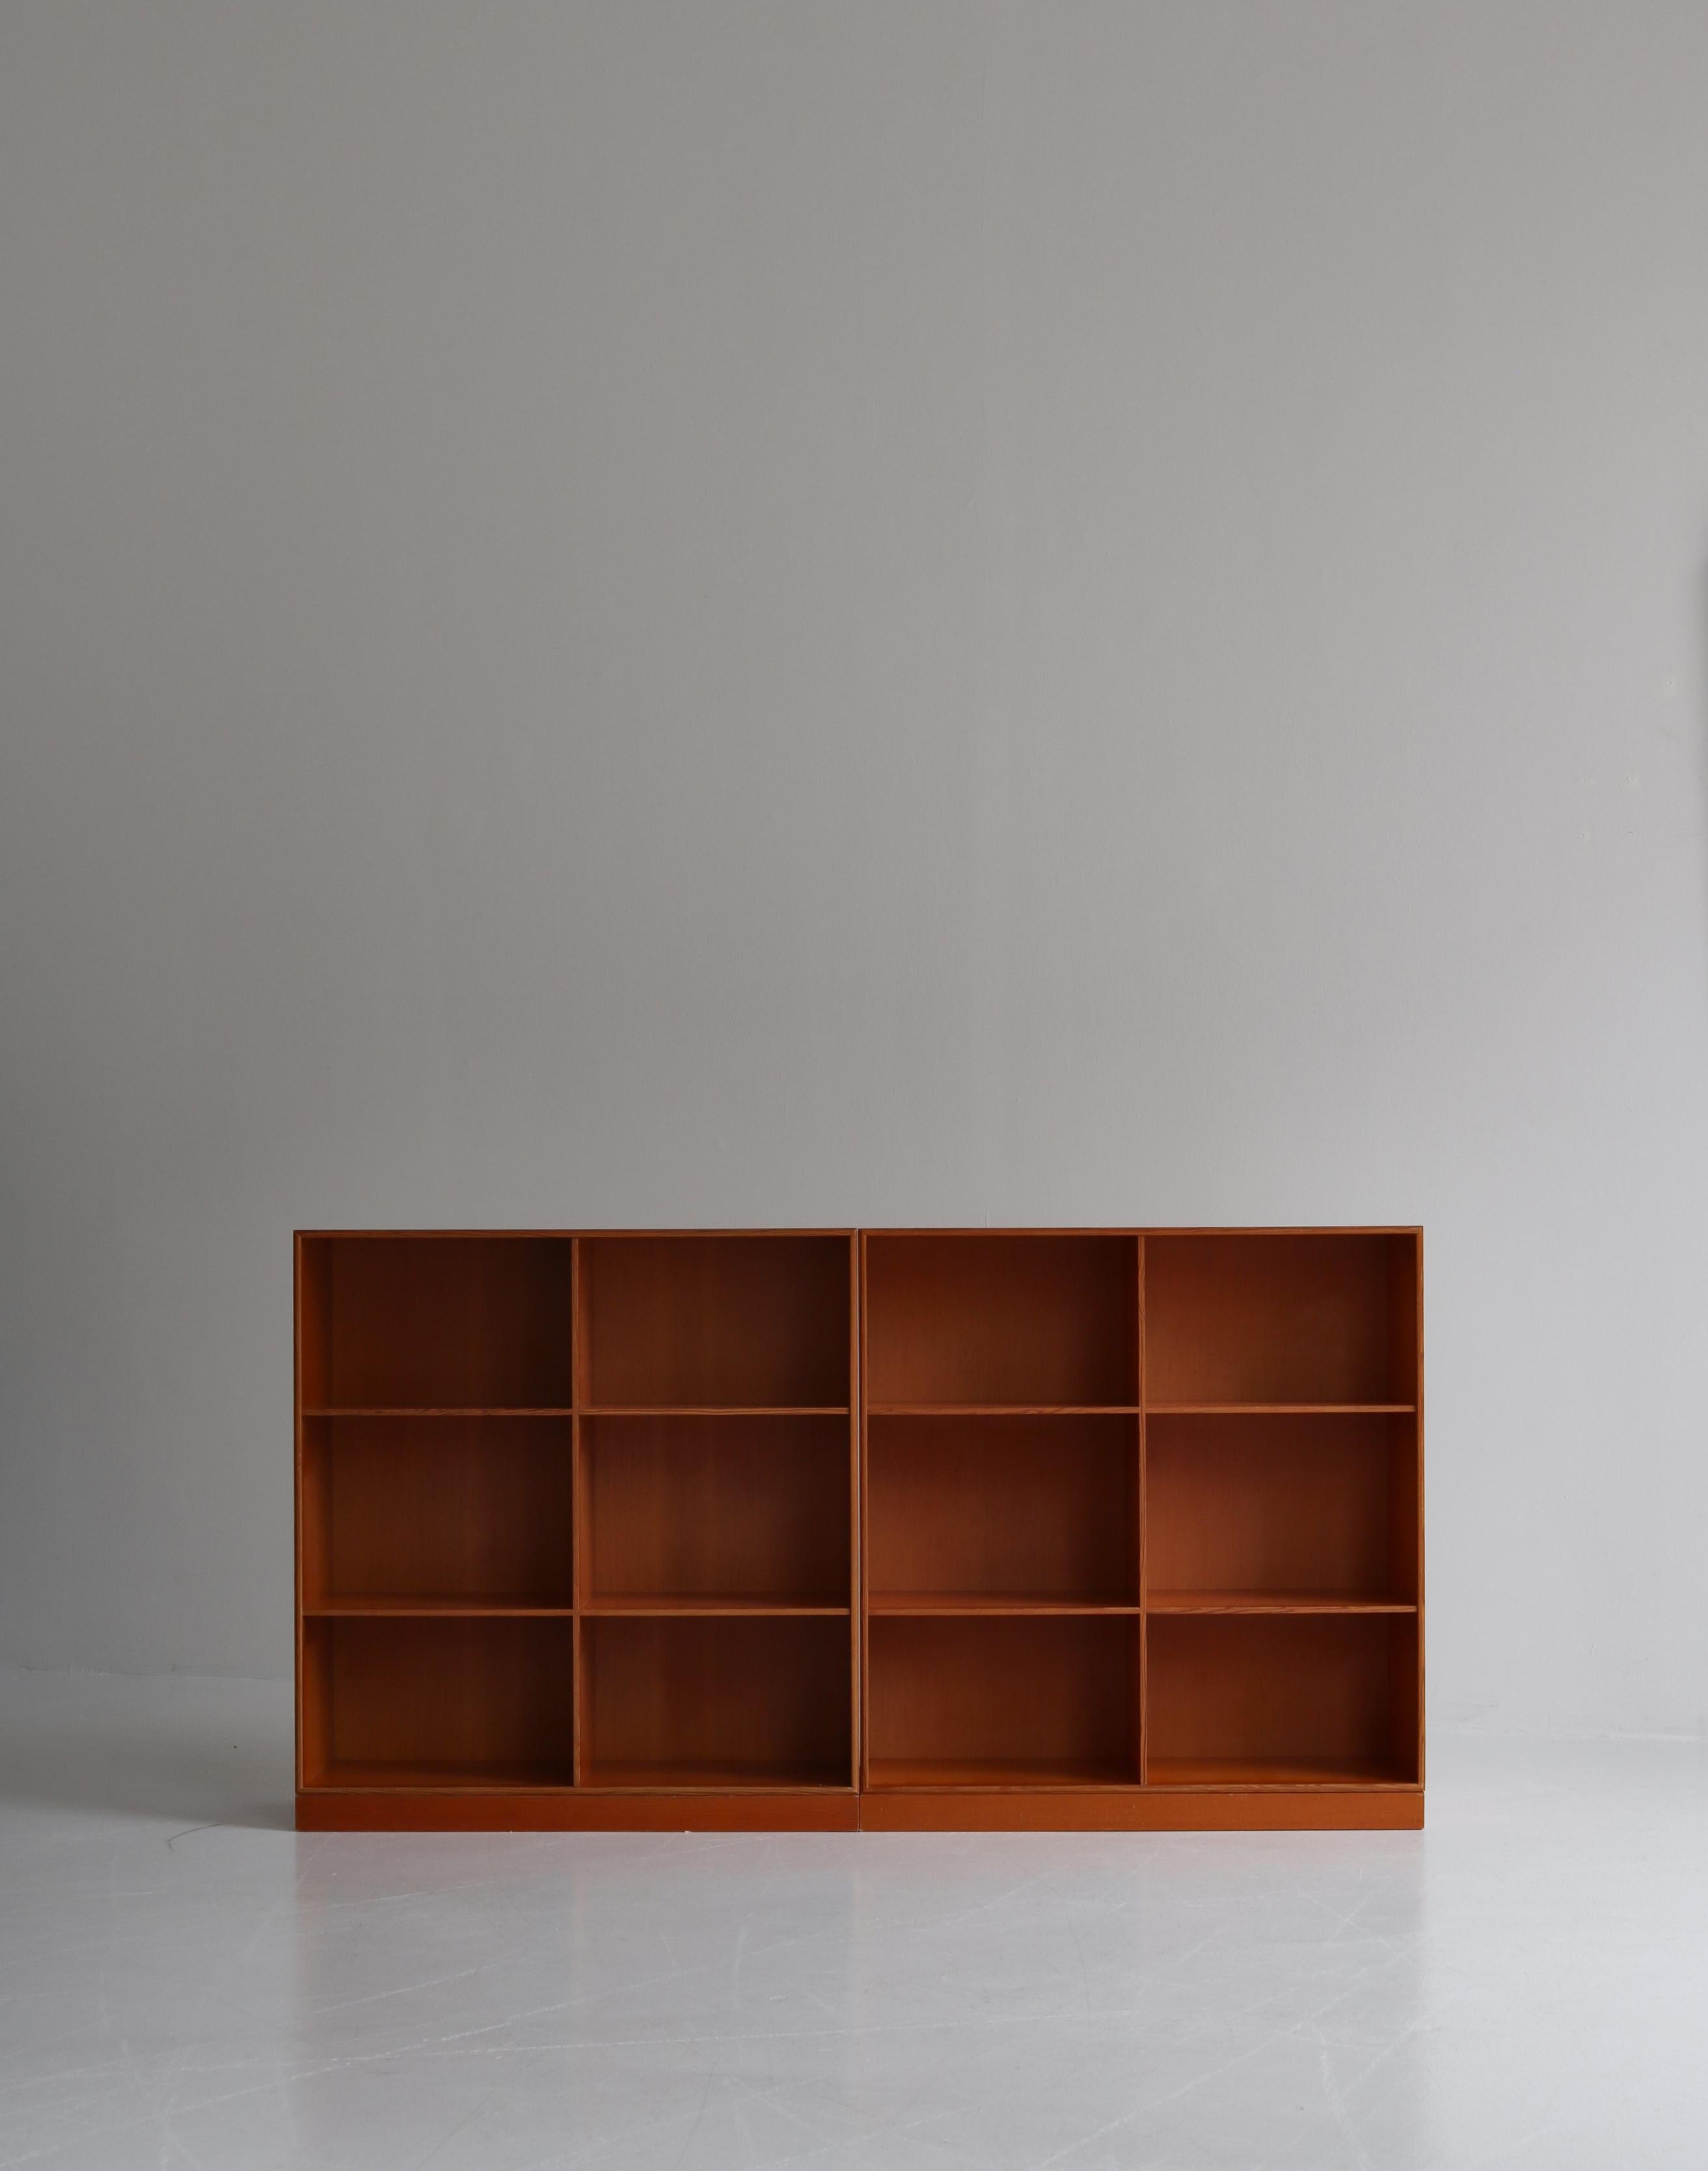 A pair of original Mogens Koch bookcases with two bases. The cases were executed at cabinetmaker Rud Rasmussen in solid Oregon pine in the 1970s. Marked by maker.

Mogens Koch's bookcase system was designed in 1944 and became a symbol of Nordic